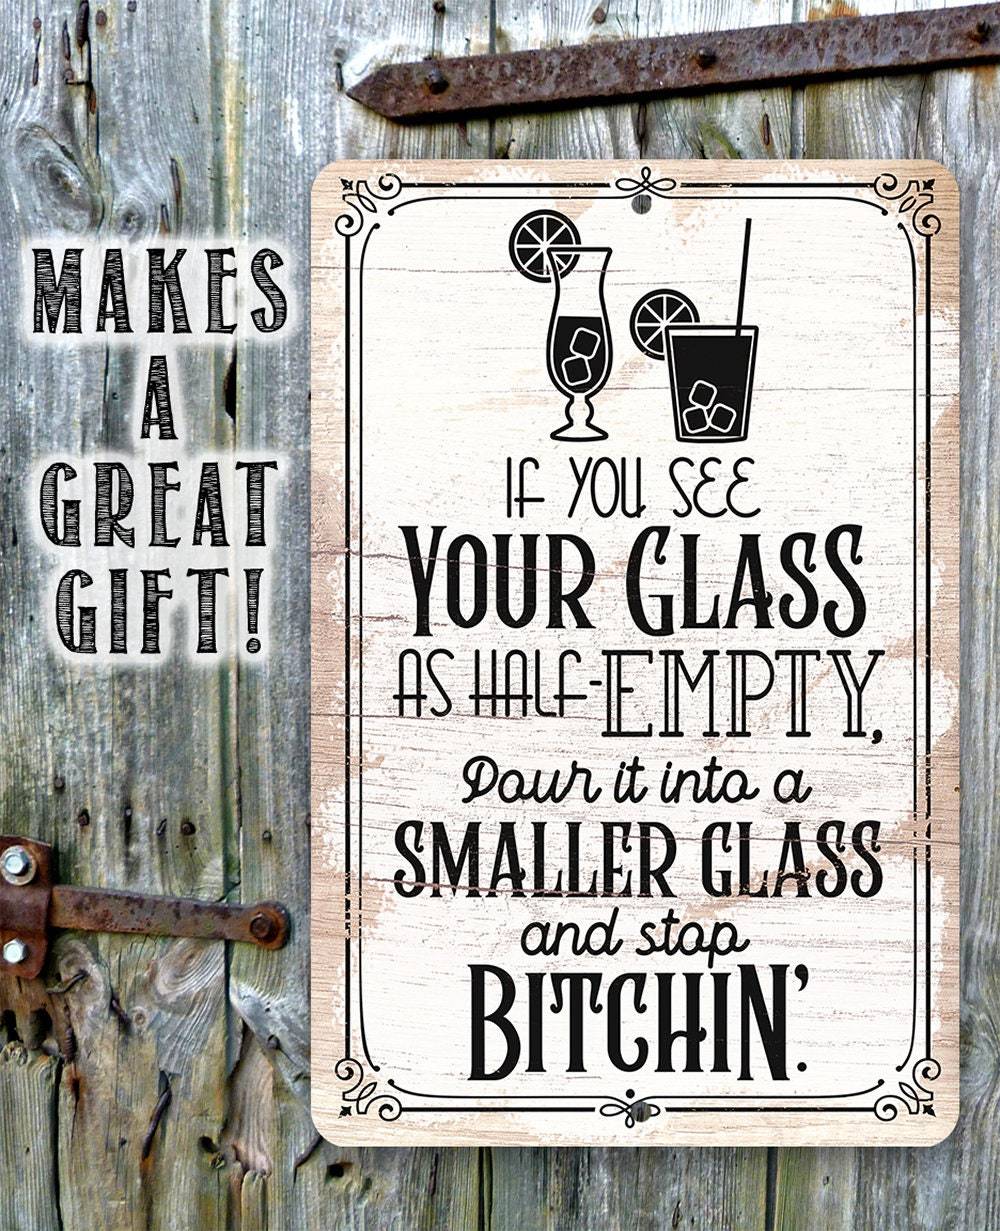 Glass as Half-Empty Pour it into a Smaller Glass - Metal Sign | Lone Star Art.